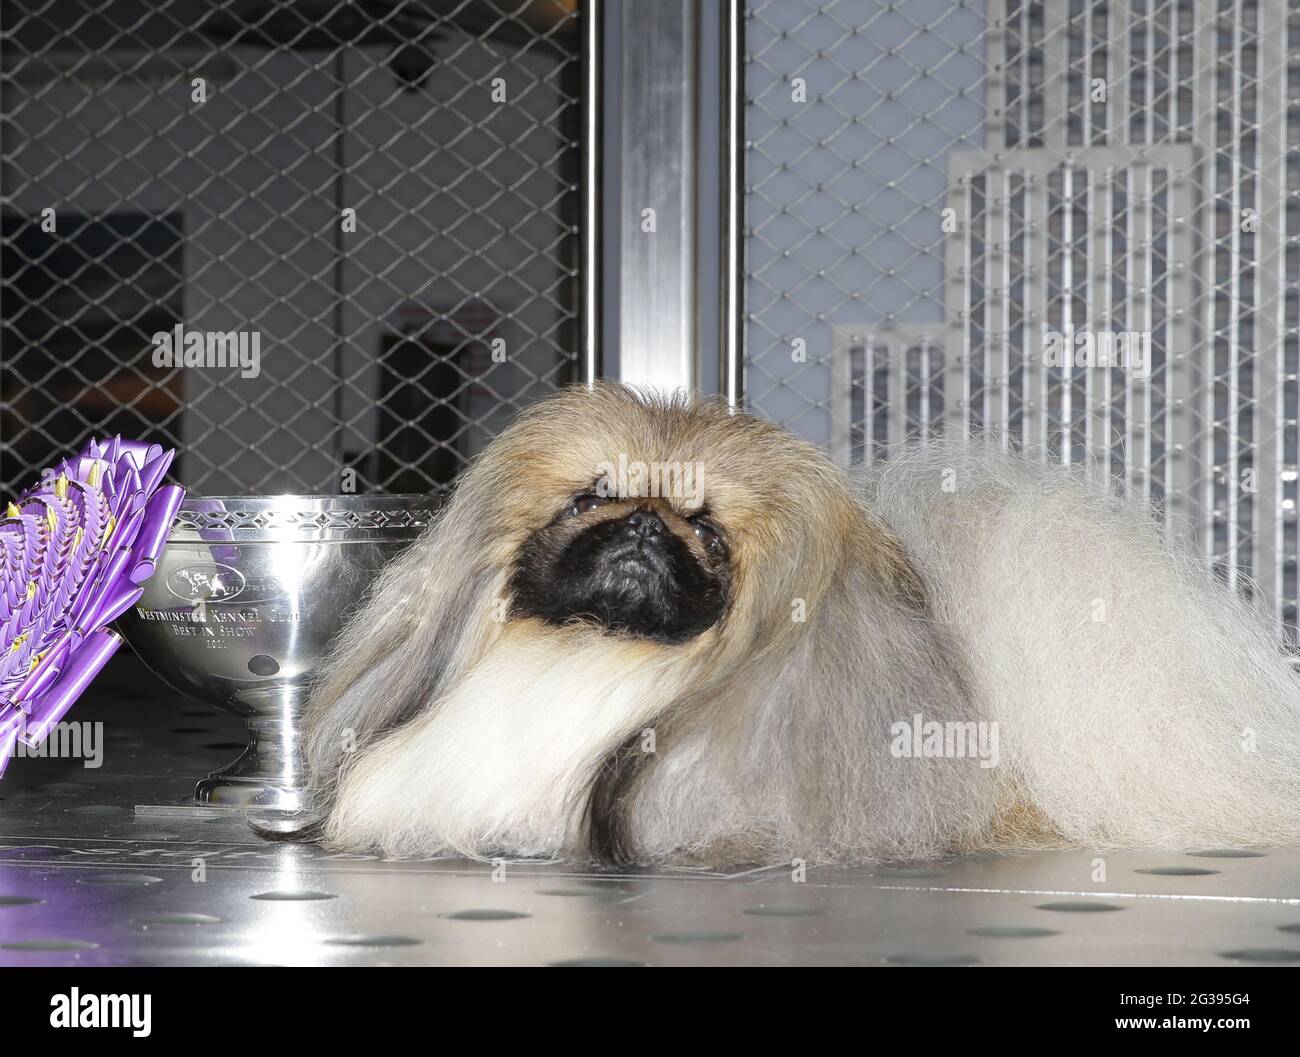 New York, United States. 14th June, 2021. Wasabi the Pekingese visits the Empire State Building after winning Best In Show the day before at the 145th annual Westminster Kennel Club Dog Show in New York City on Monday, June 14, 2021. This years Westminster Dog Show was delayed due to COVID-19 and next years competition will return again to Madison Square Garden. Photo by John Angelillo/UPI Credit: UPI/Alamy Live News Stock Photo